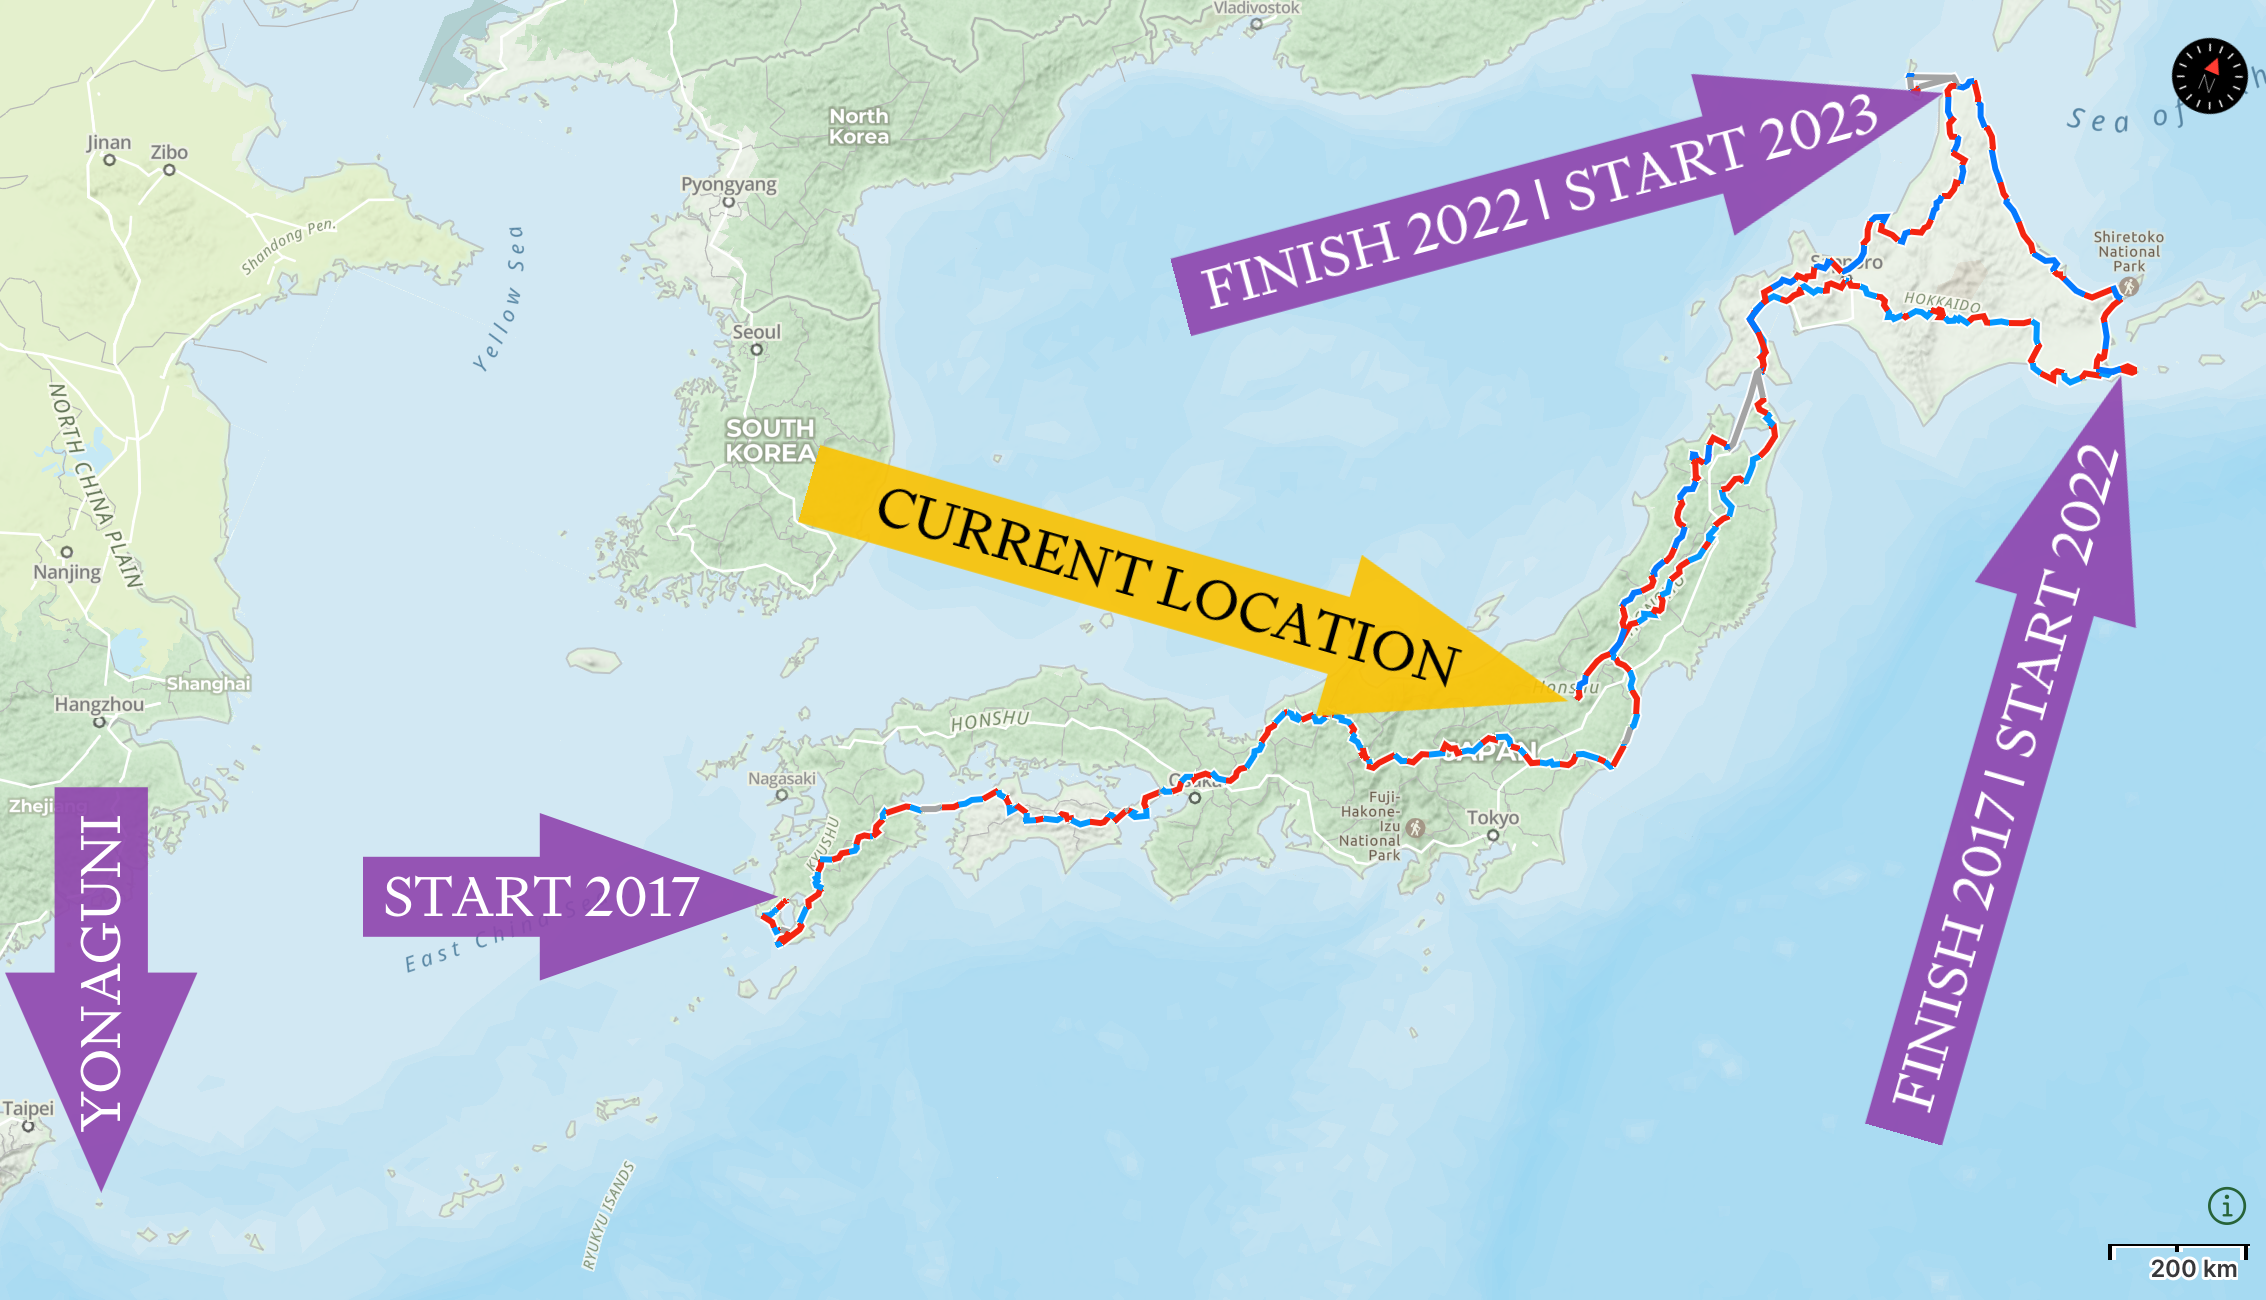 Map of Japan with my walking routes in 2017, 2022, and 2023 highlighted.